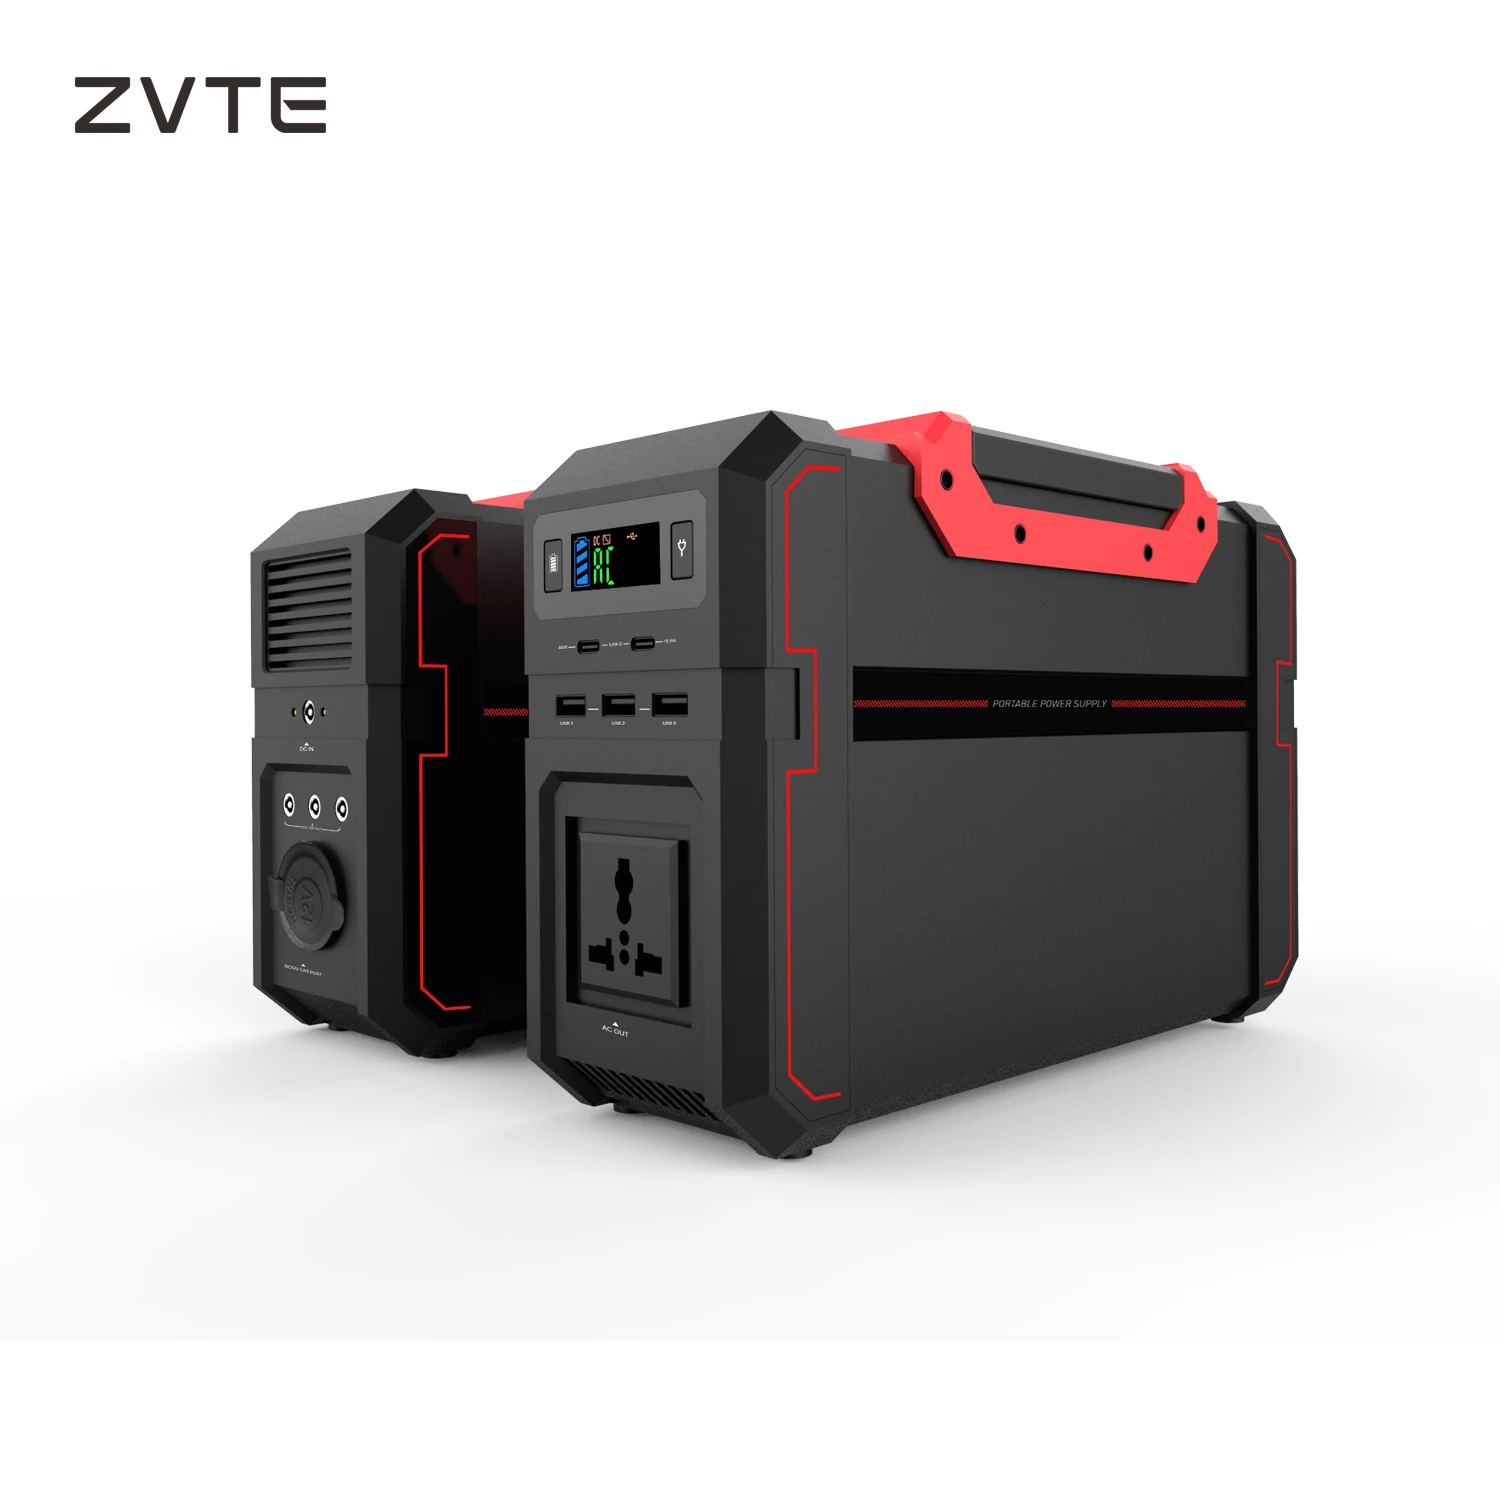 

Portable Power Station 444Wh Power Generator 450W Pure Sine Wave Inverter Emergency Power Supply Charged by Solar/AC Outlet/Cars